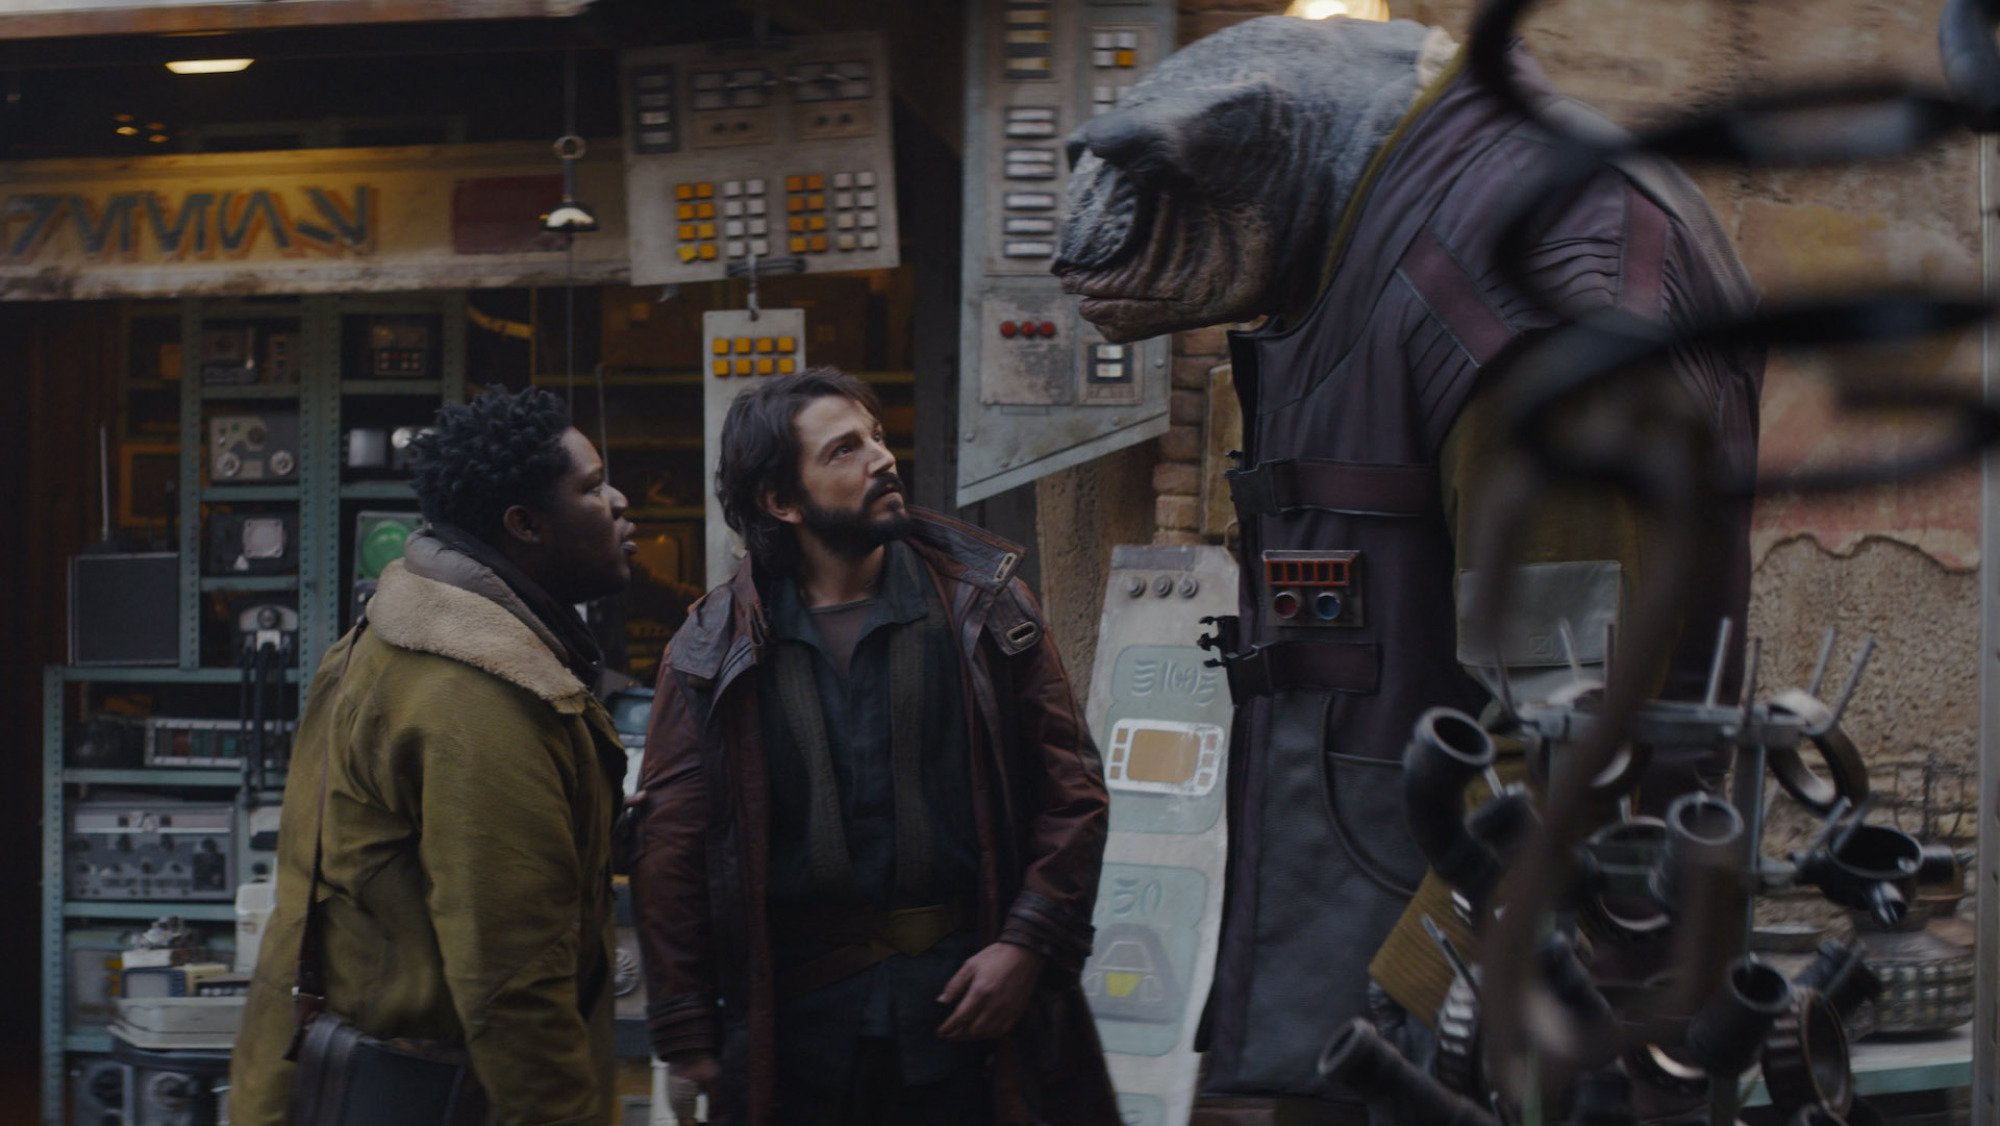 Two men and an alien stand on a sci-fi series set.